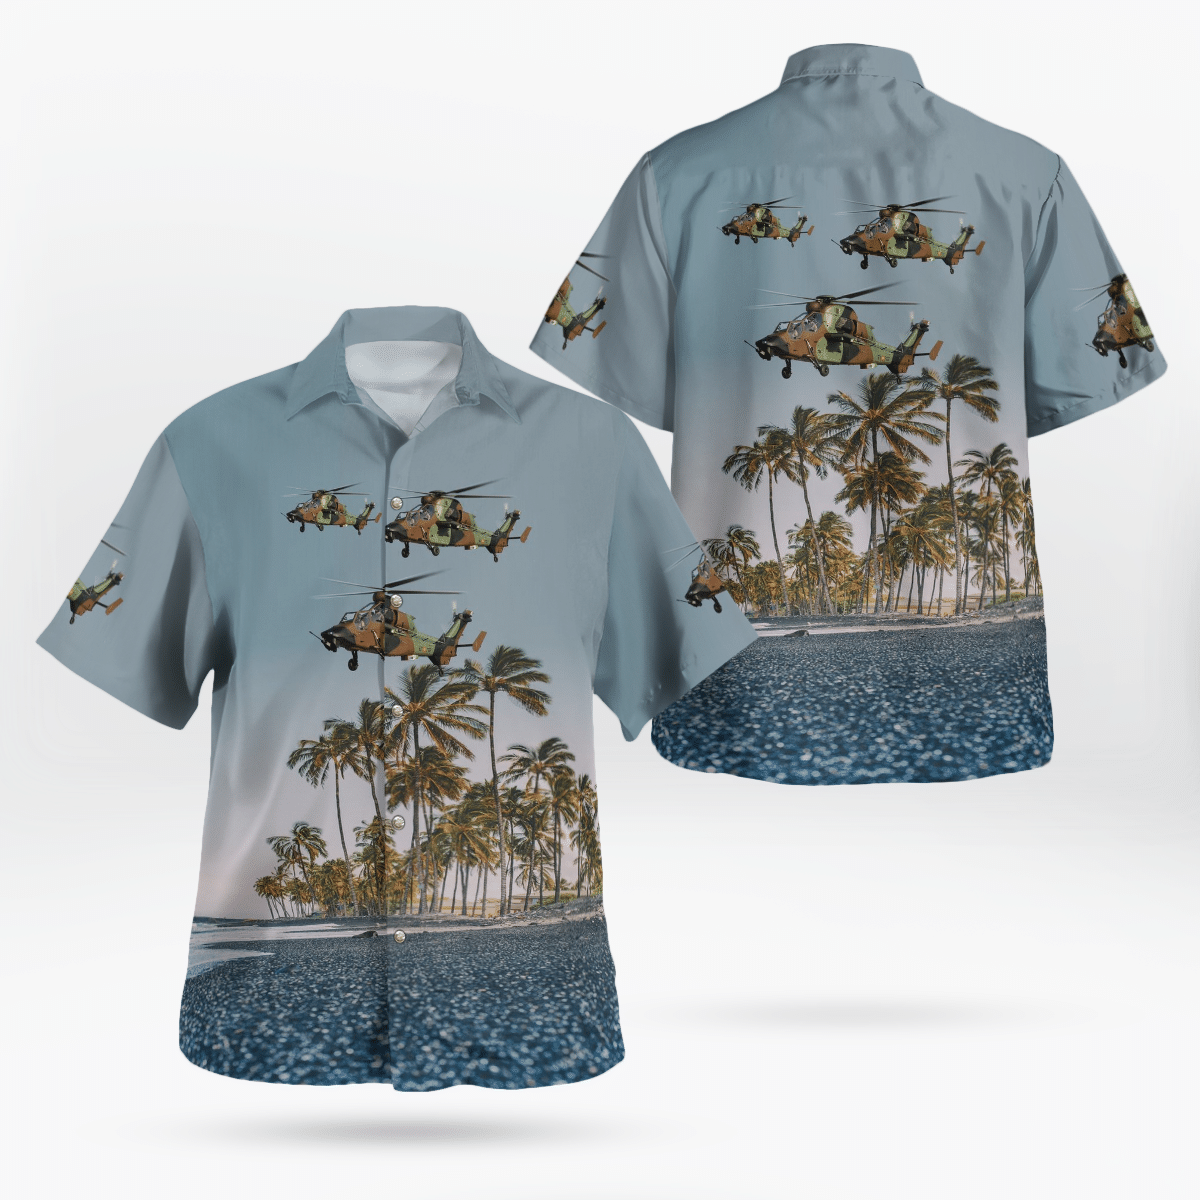 Consider getting these Hawaiian Shirt for your friends 225